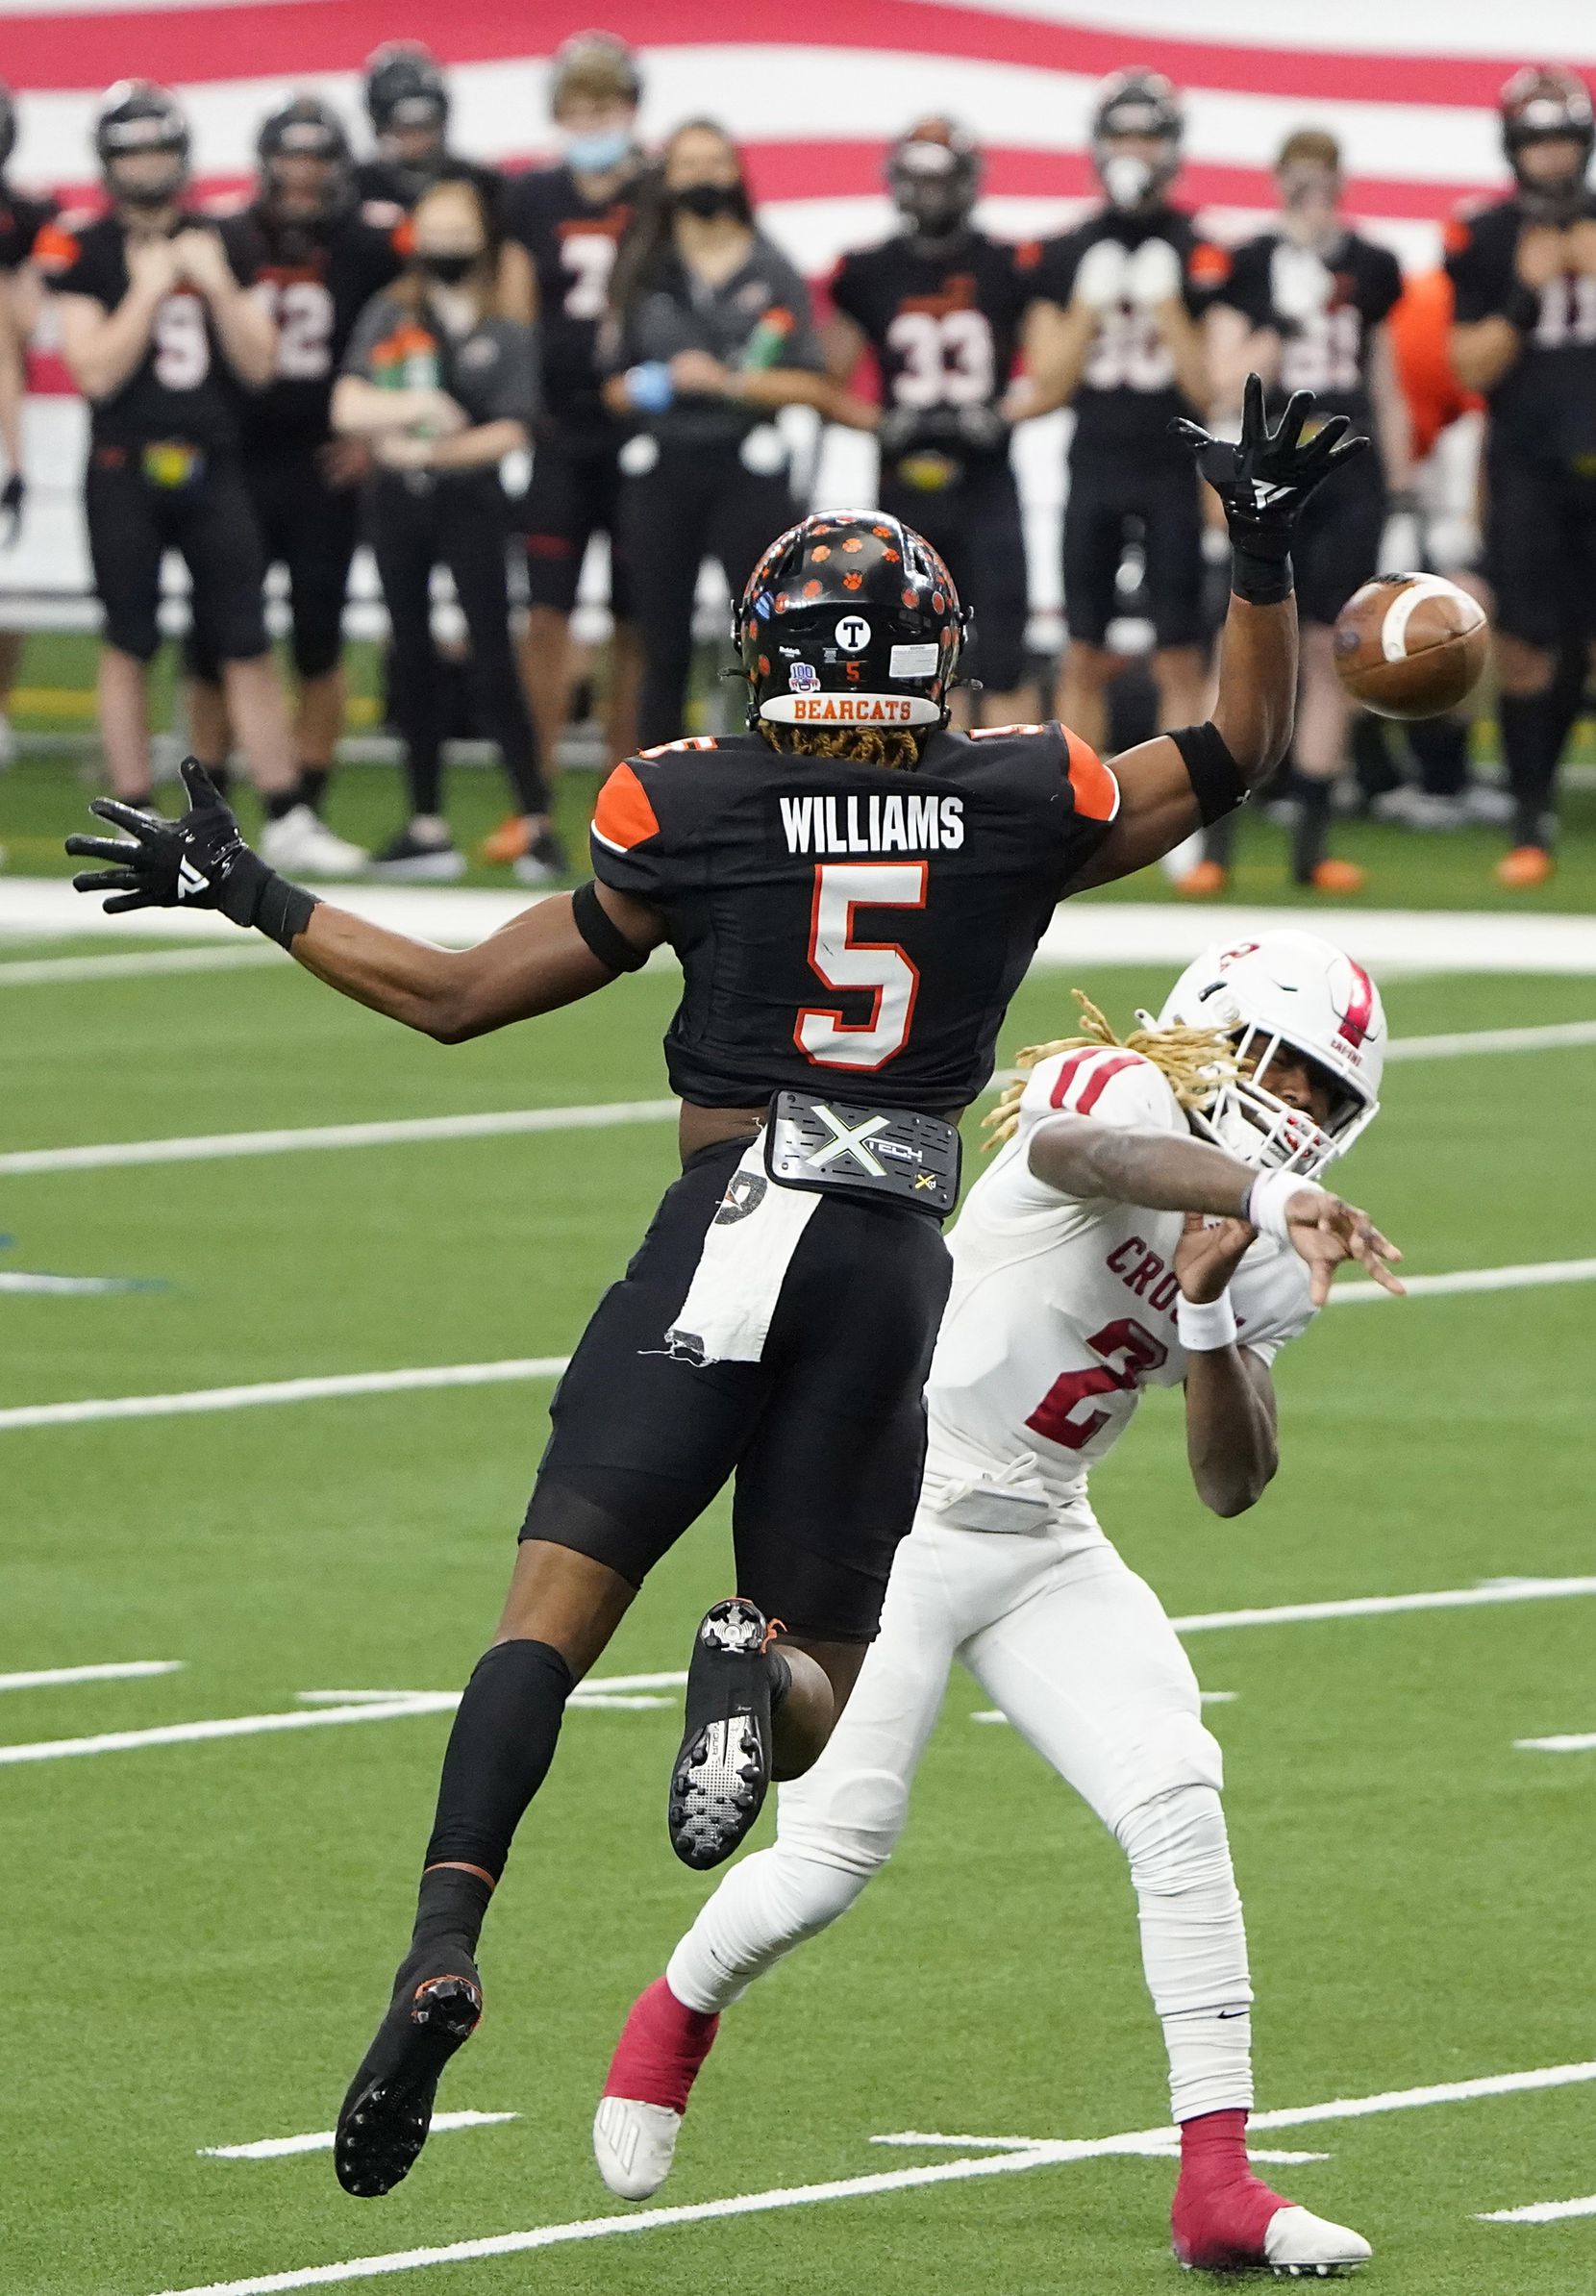 Crosby Deniquez Dunn (2) throws a touchdown pass under pressure from Aledo linebacker Ryan Williams (5) during the first half of the Class 5A Division II state football championship game at AT&T Stadium on Friday, Jan. 15, 2021, in Arlington. (Smiley N. Pool/The Dallas Morning News)